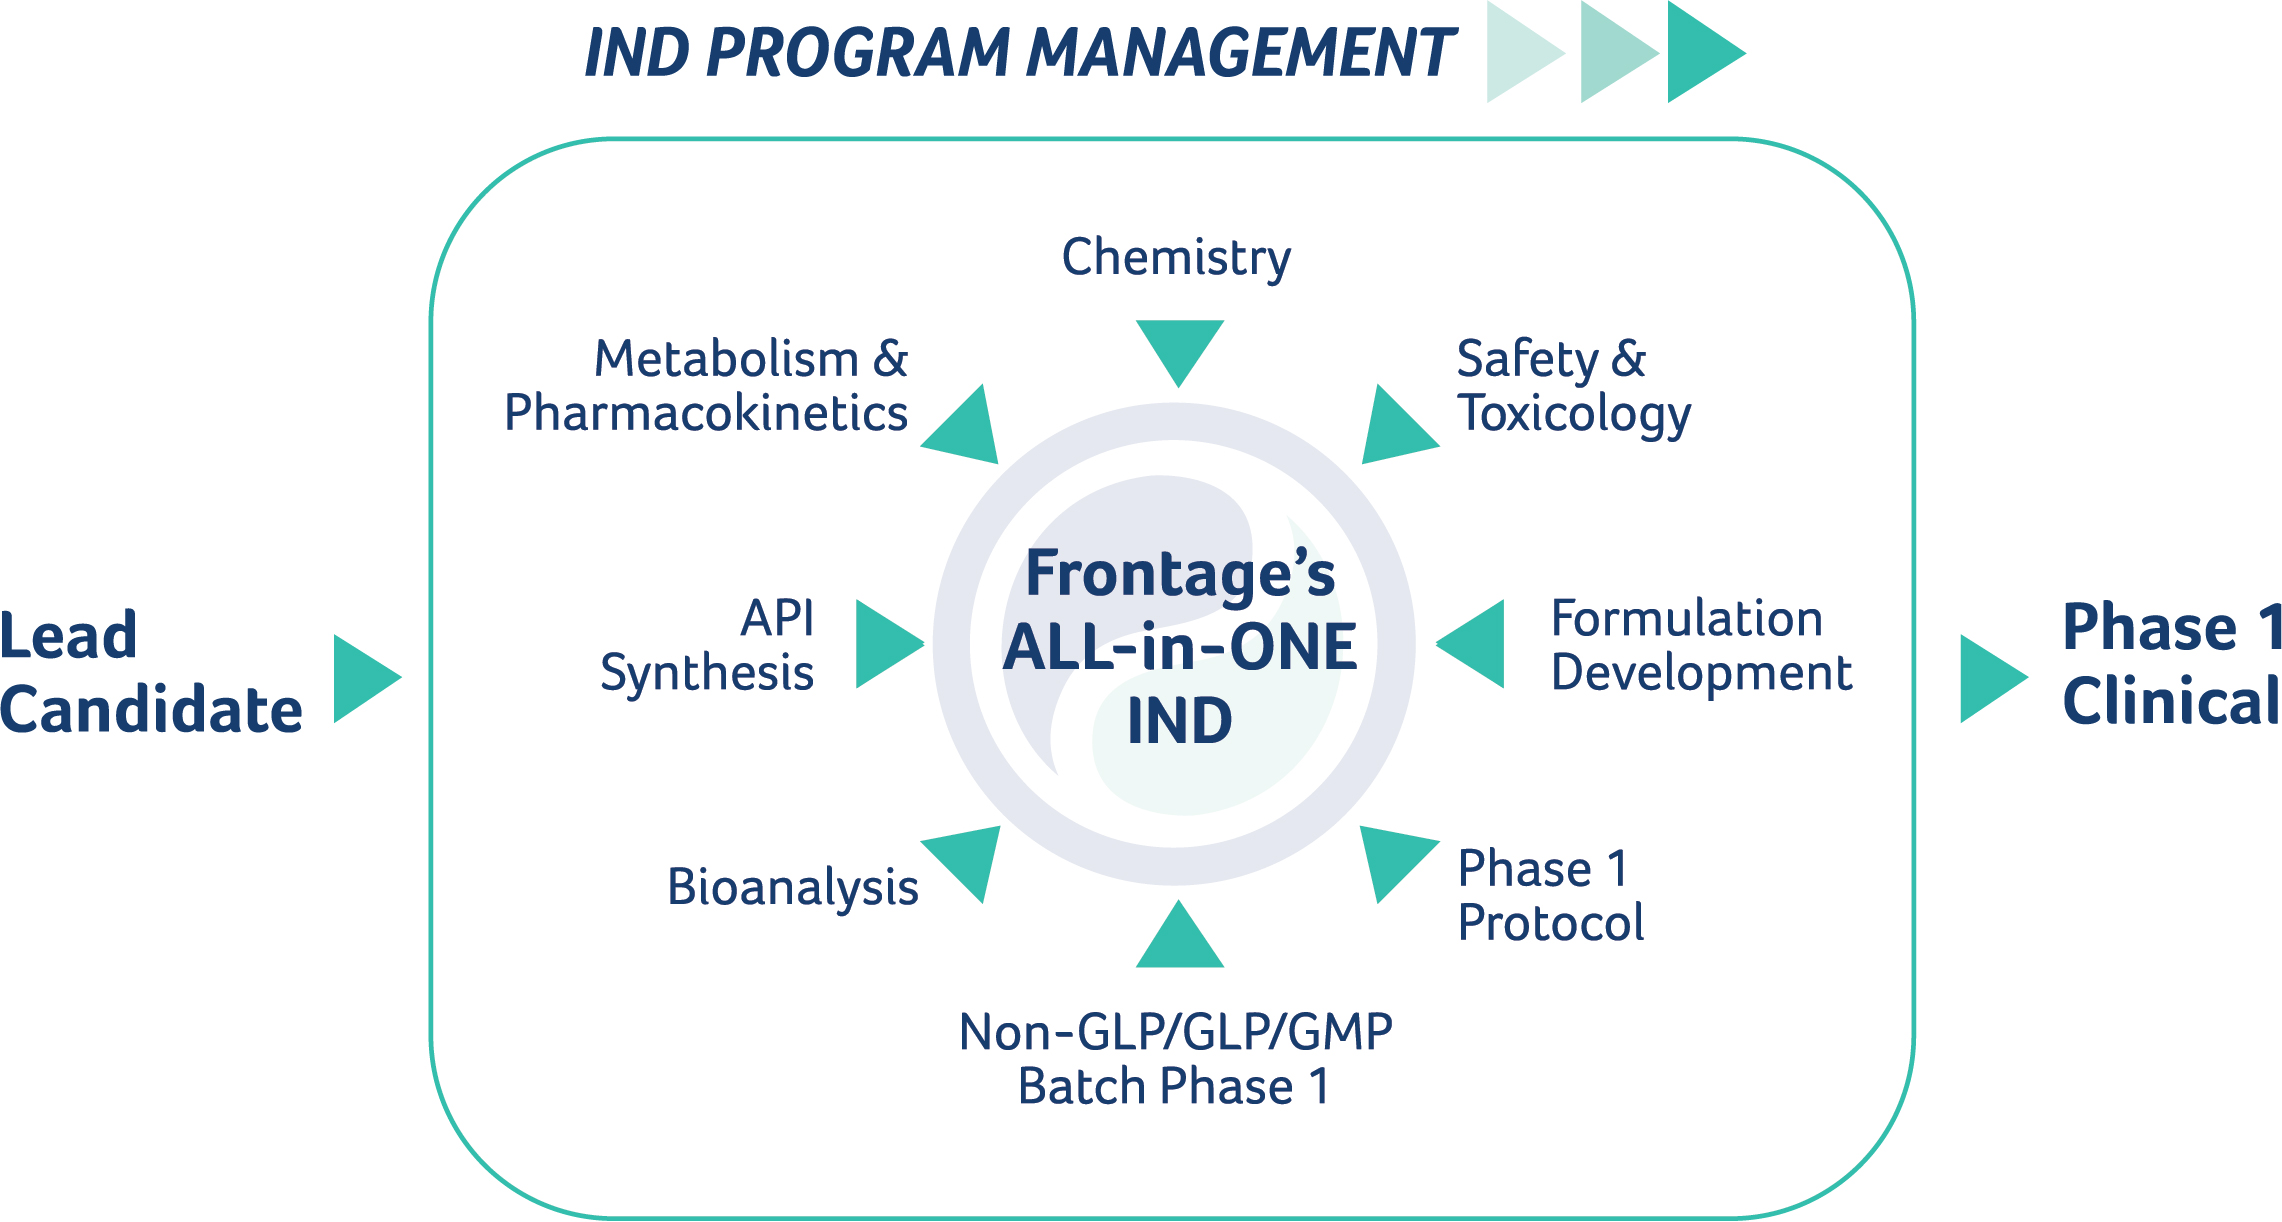 Frontage's All in One IND Program Management